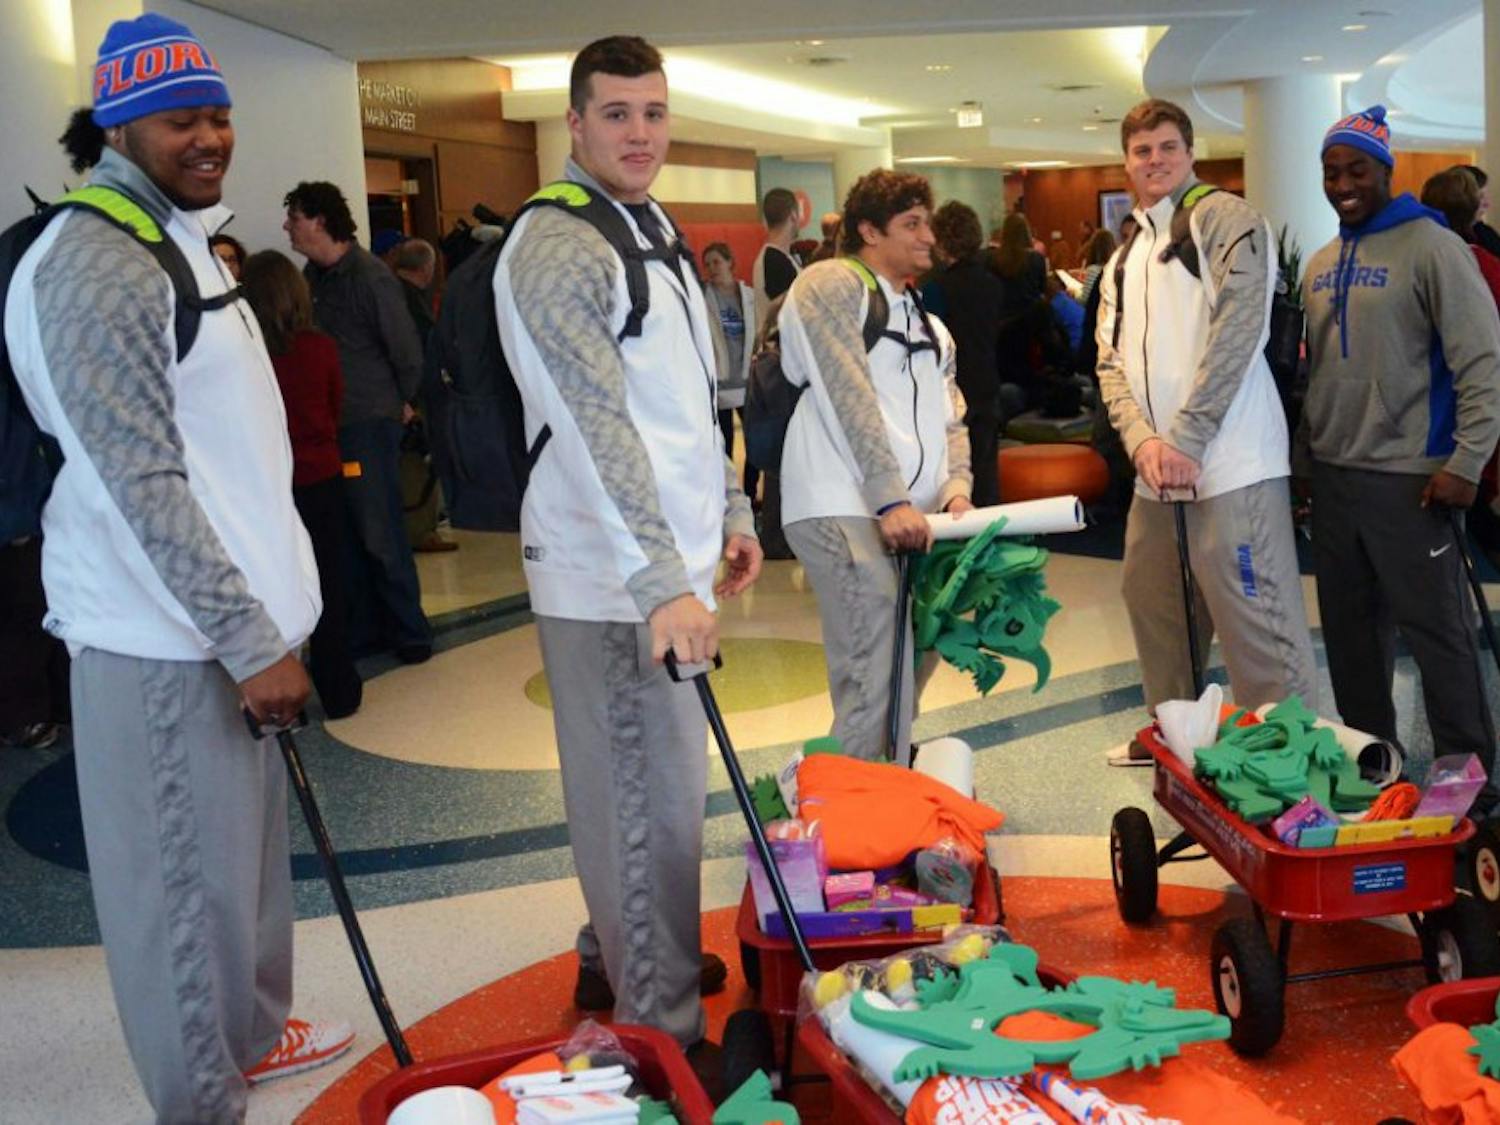 Twenty-three UF football players spent Thursday afternoon visiting patients at the Children's Hospital of Alabama at UAB in Birmingham.